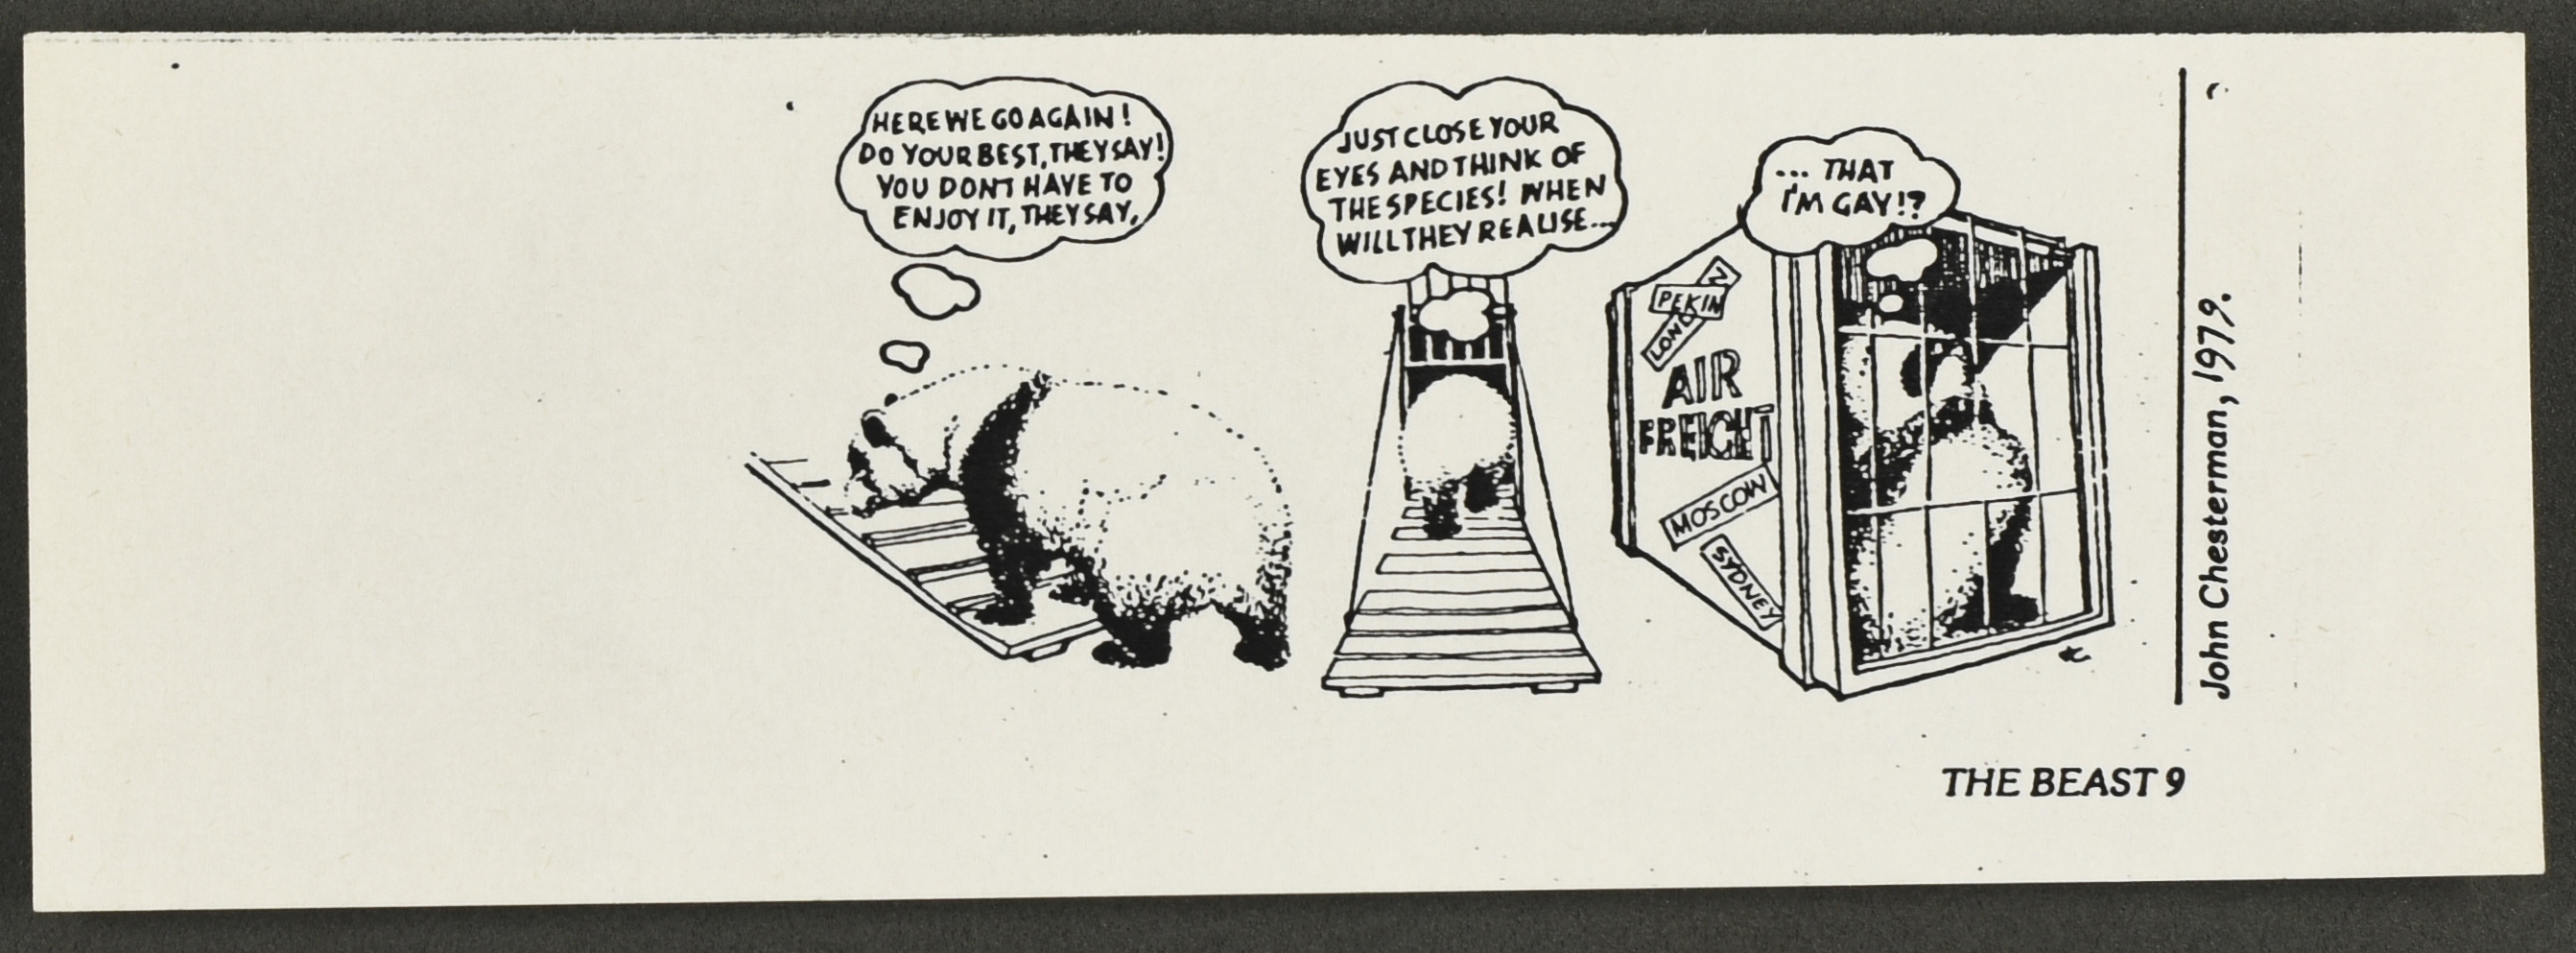 Cartoon of frustrated gay panda, used to for breeding offspring